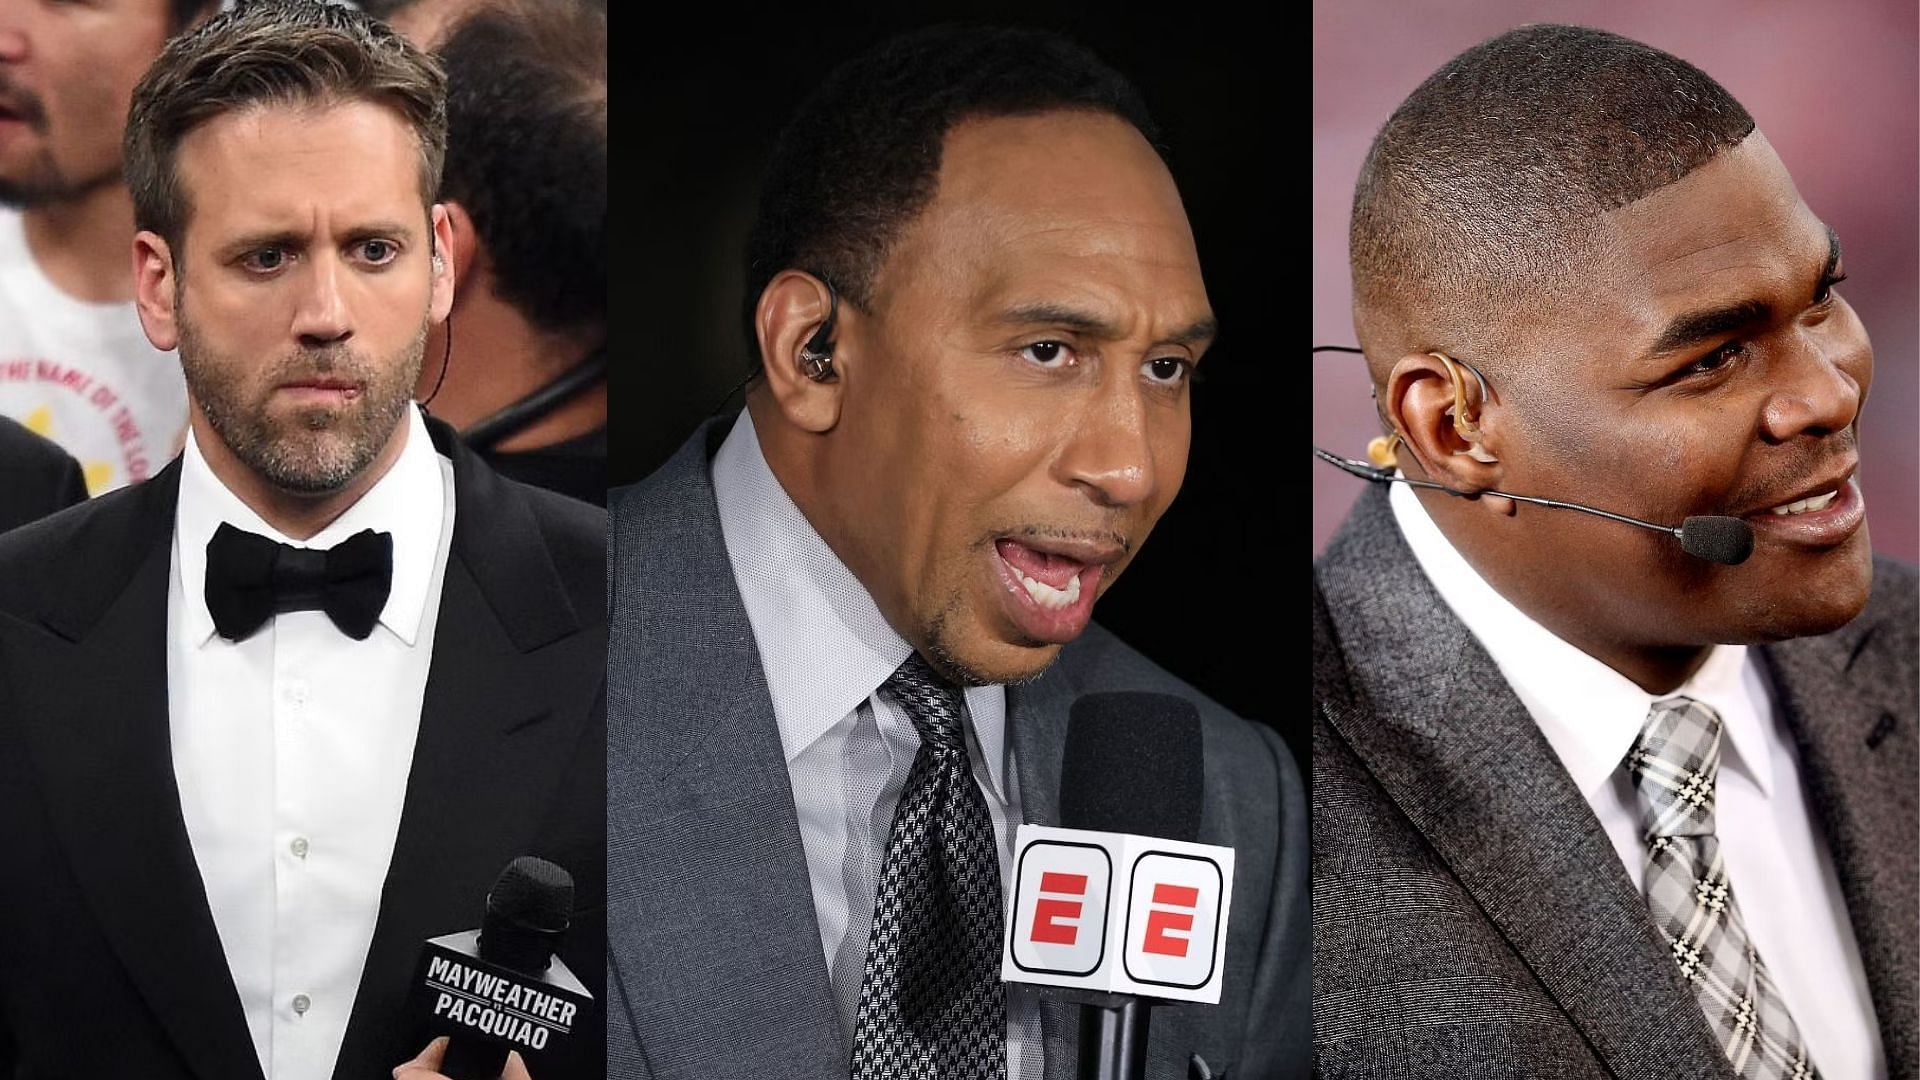 Stephen A. Smith opens up on ESPN layoffs, warns 'more is coming